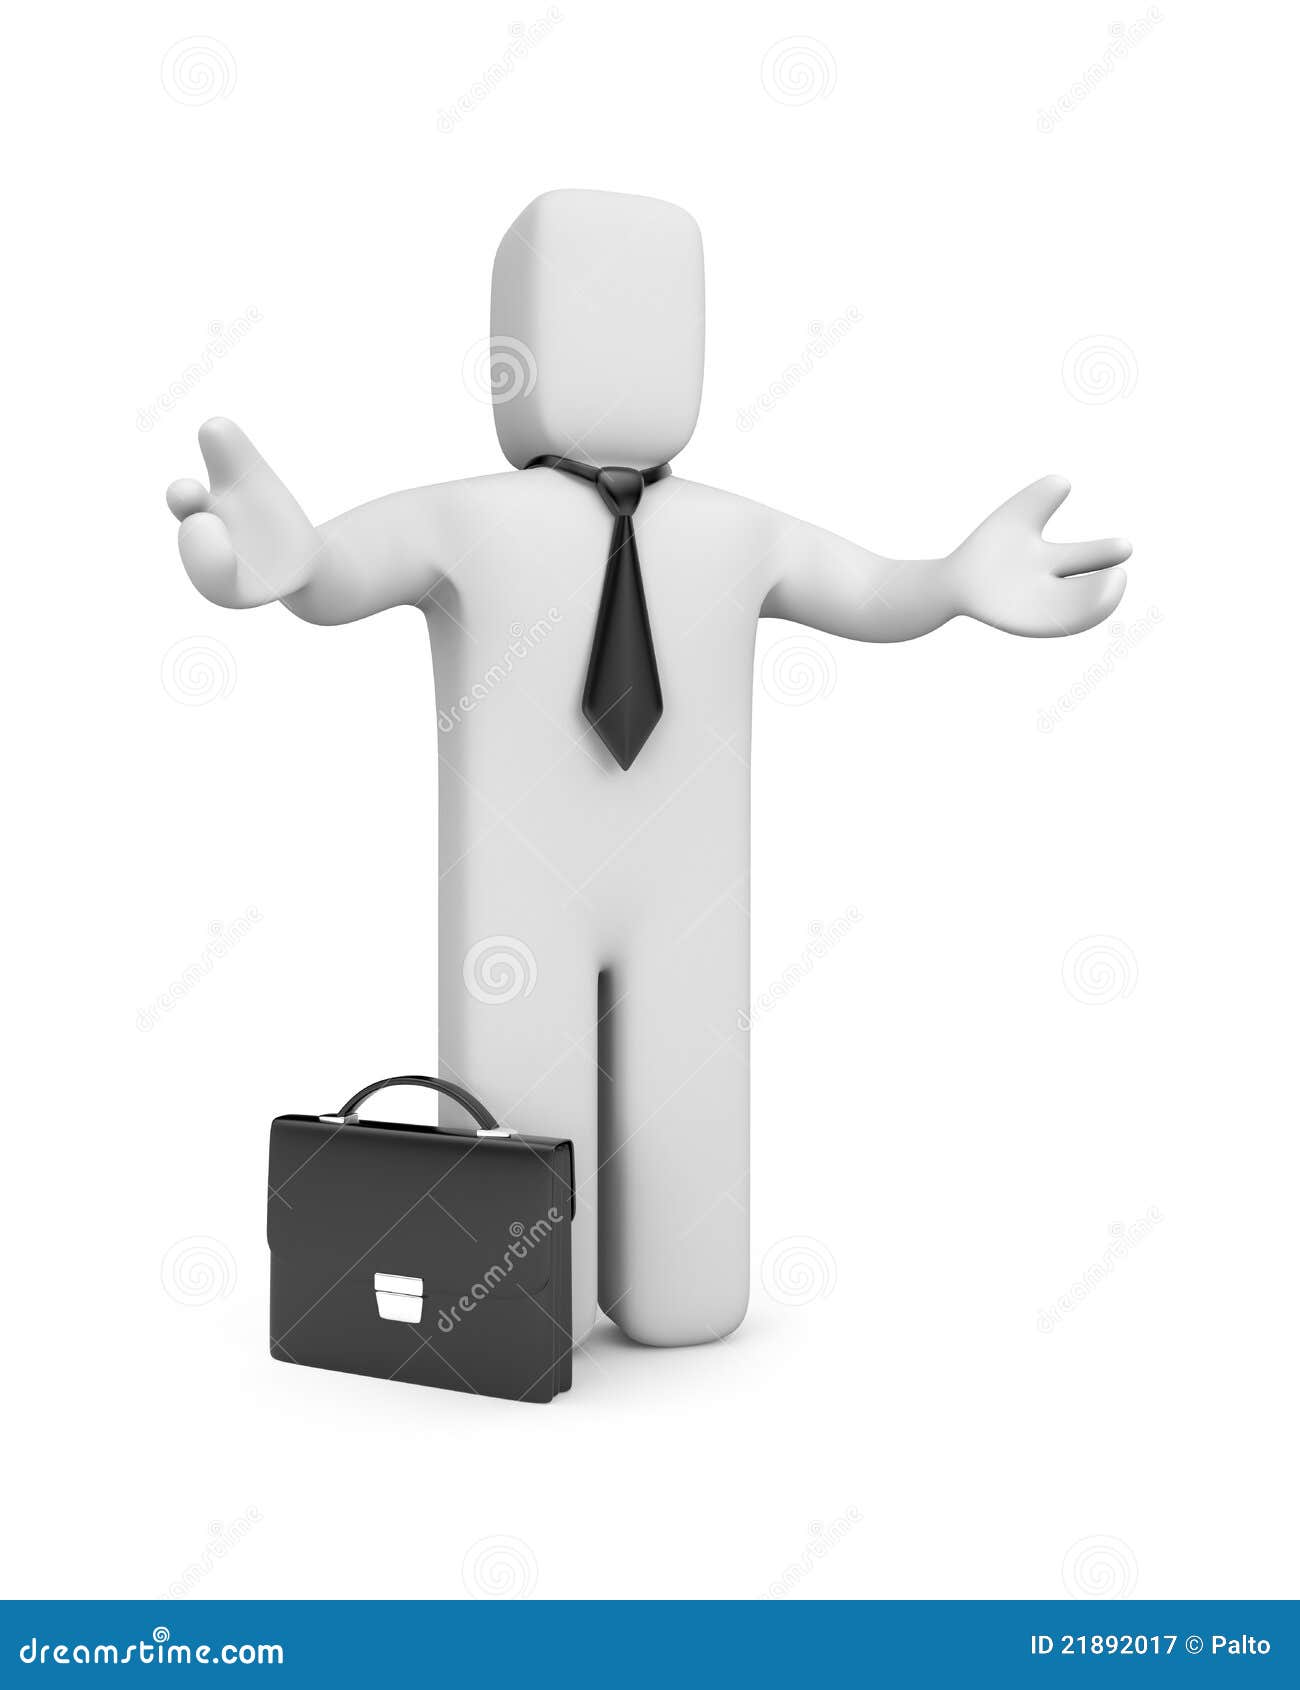 Business services waits you. Business concept. Separated on white